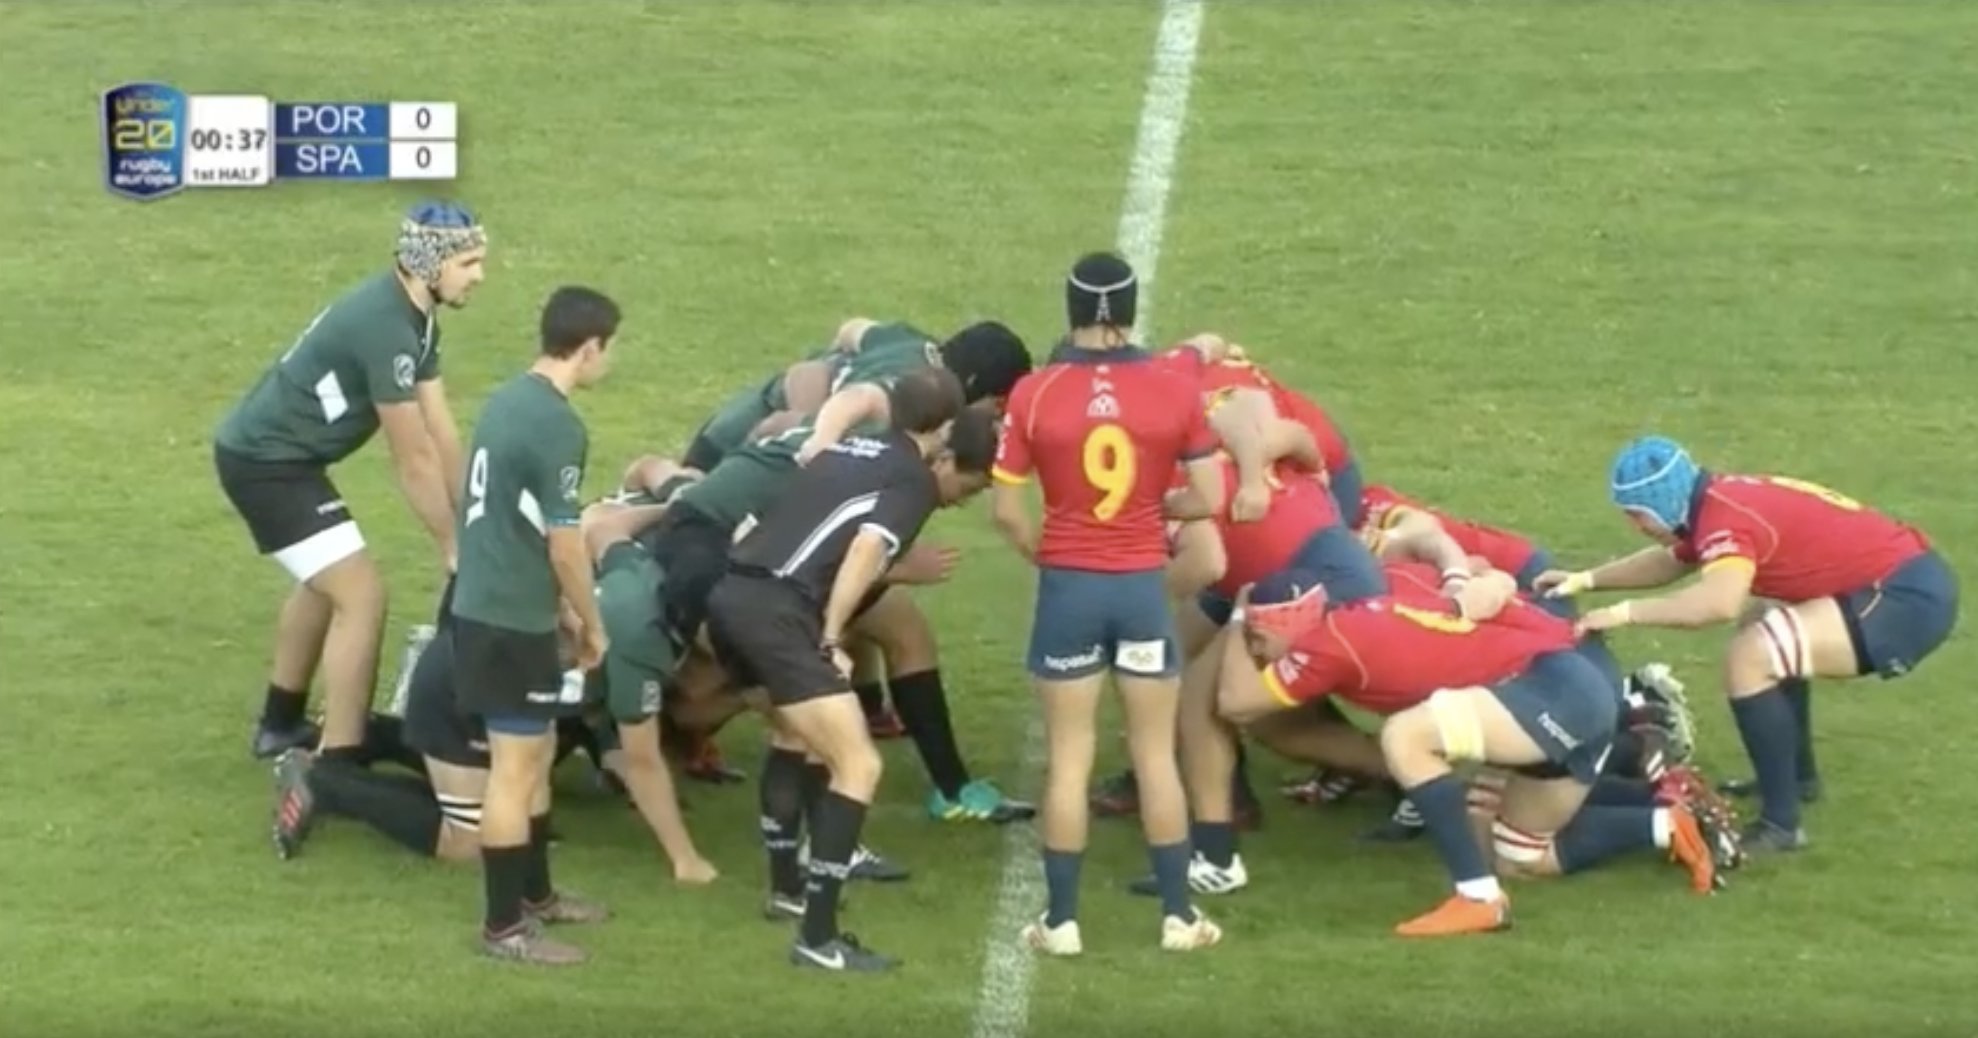 WATCH: Spanish scrum-half's try scoring footwork is wondrous to behold